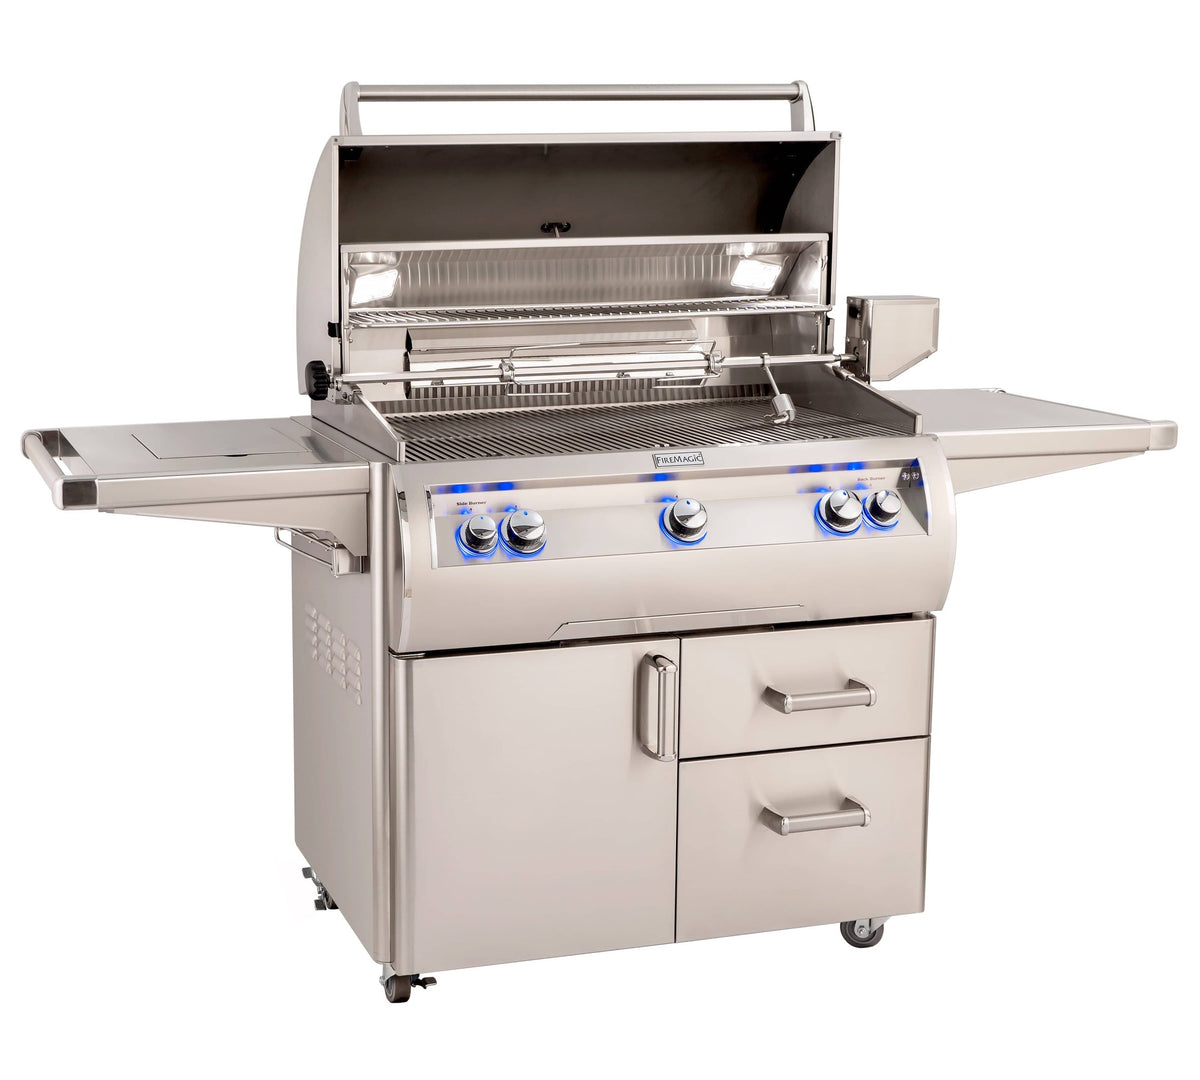 Firemagic Grills Fire Magic Echelon Diamond E790s Portable Grill with Rotisserie, Analog Thermometer and Flush Mounted Single Side Burner / E790s-9EAN(P)-62, E790s-9LAN(P)-62, E790s-9EAN(P)-62-W, E790s-9LAN(P)-62-W